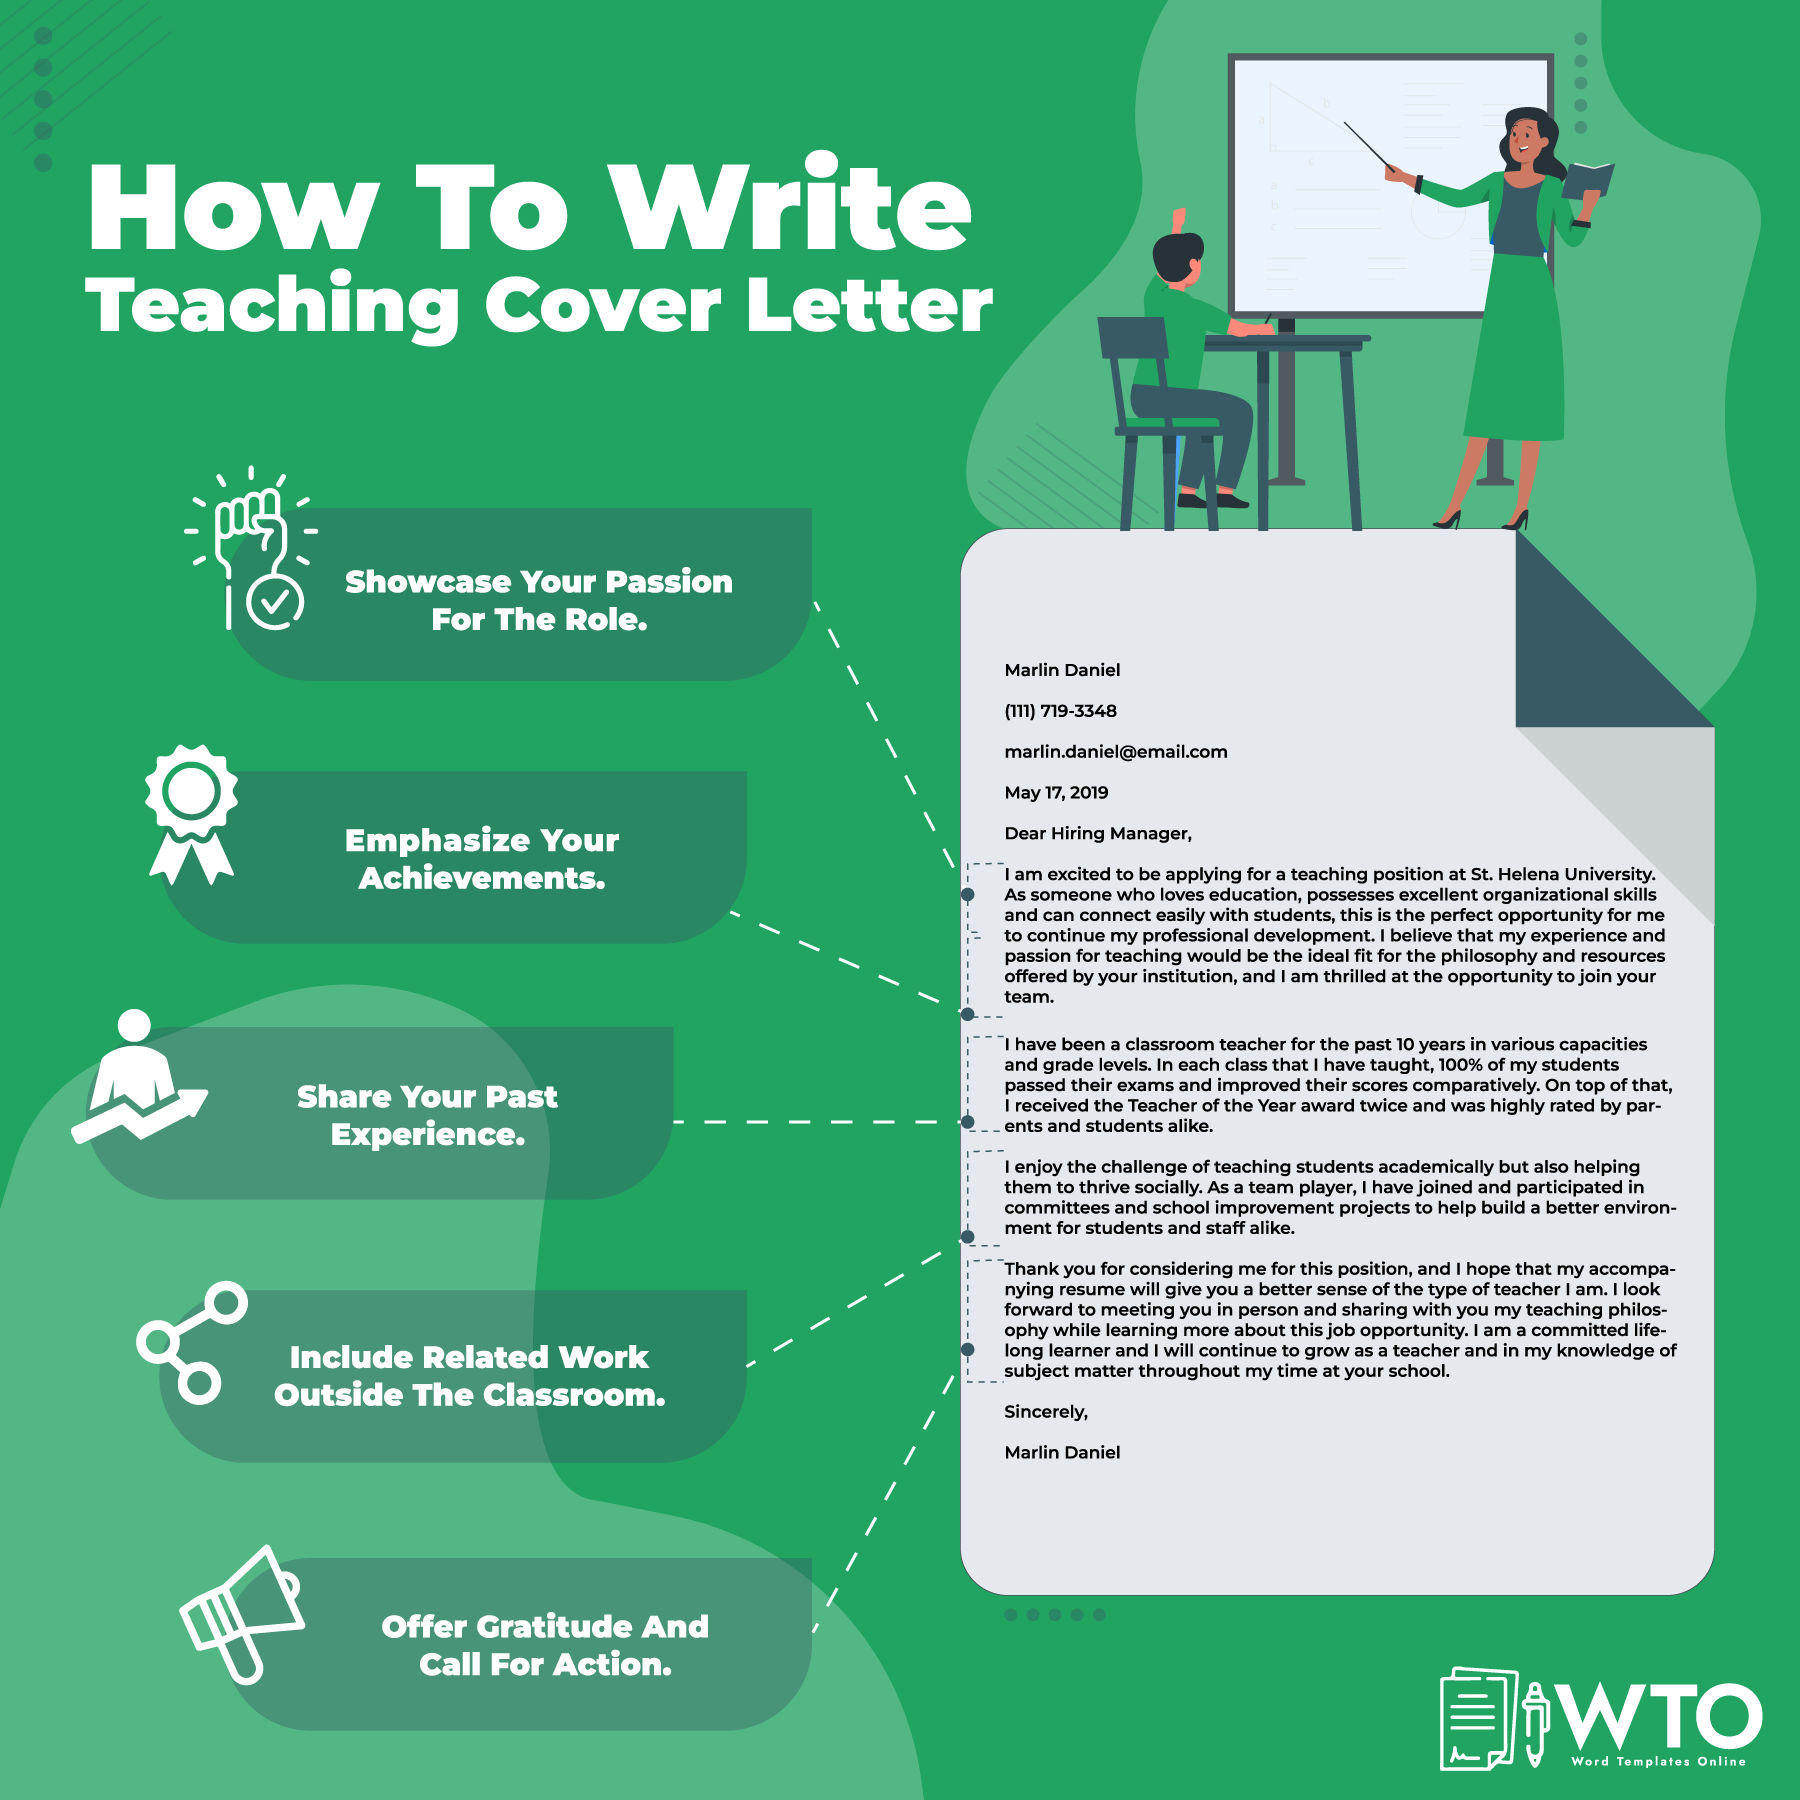 This infographic is about how to write teaching cover letter.